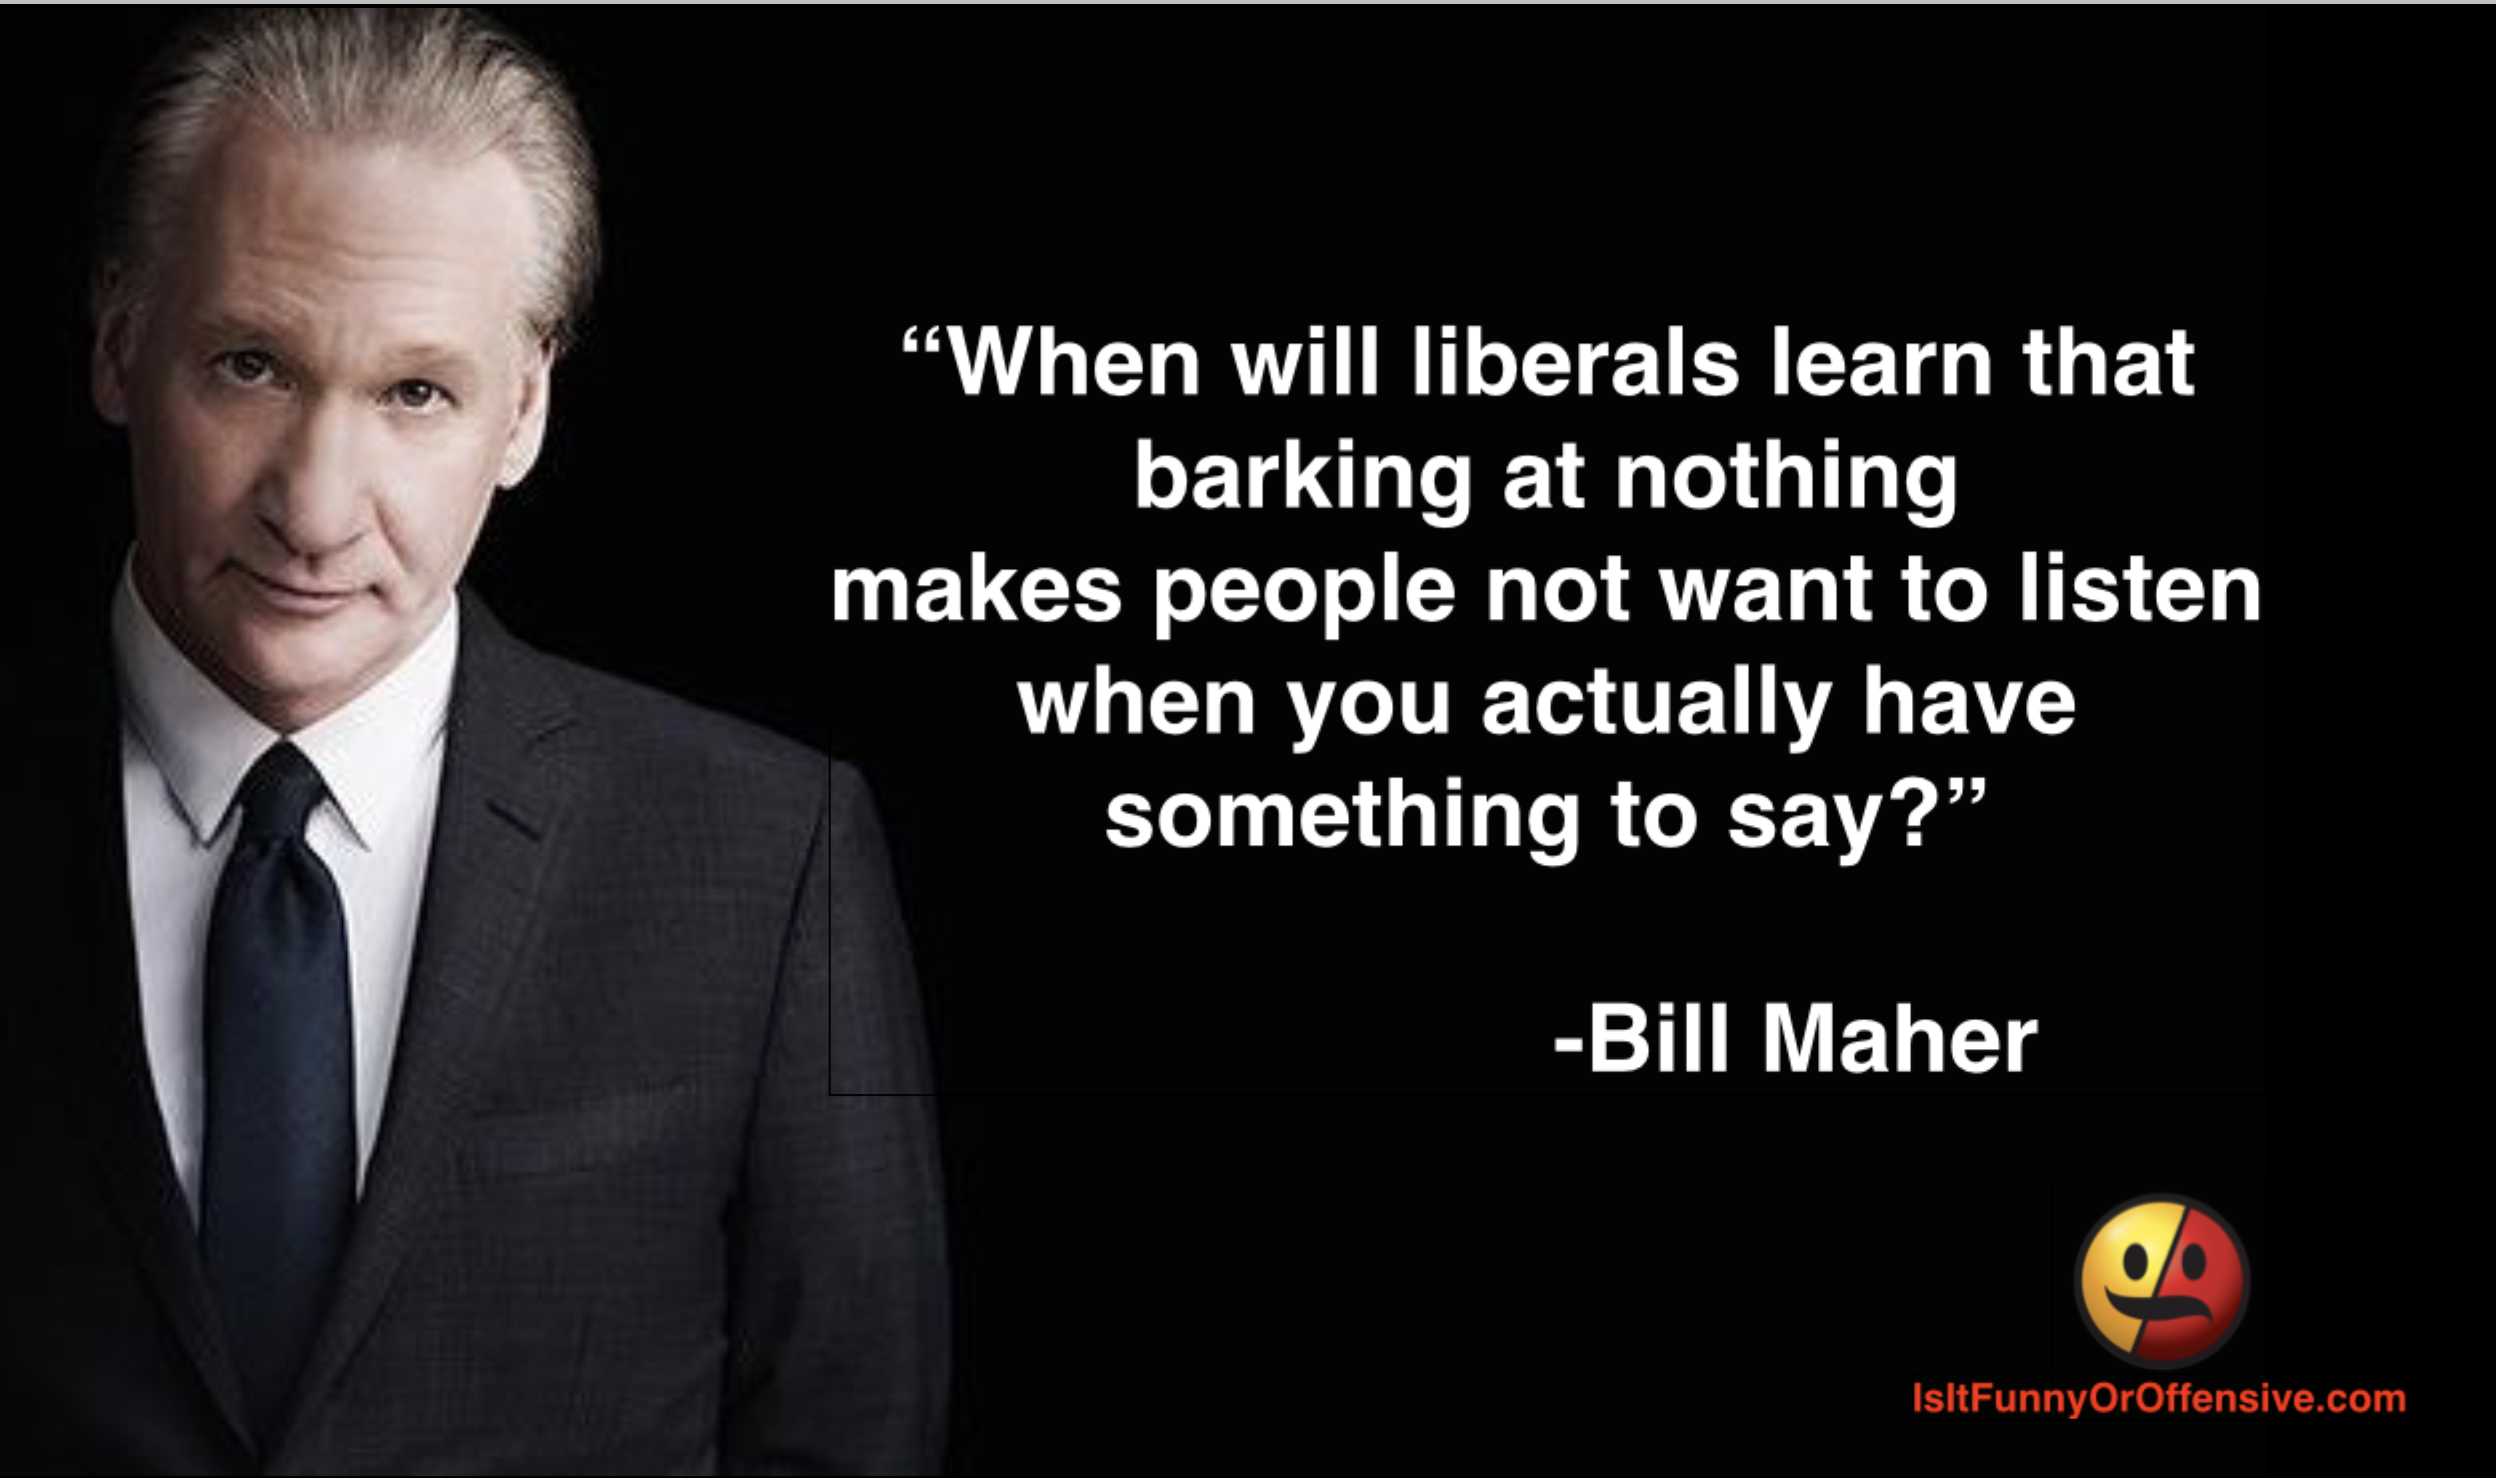 Bill Maher on Liberals Getting Easily Offended